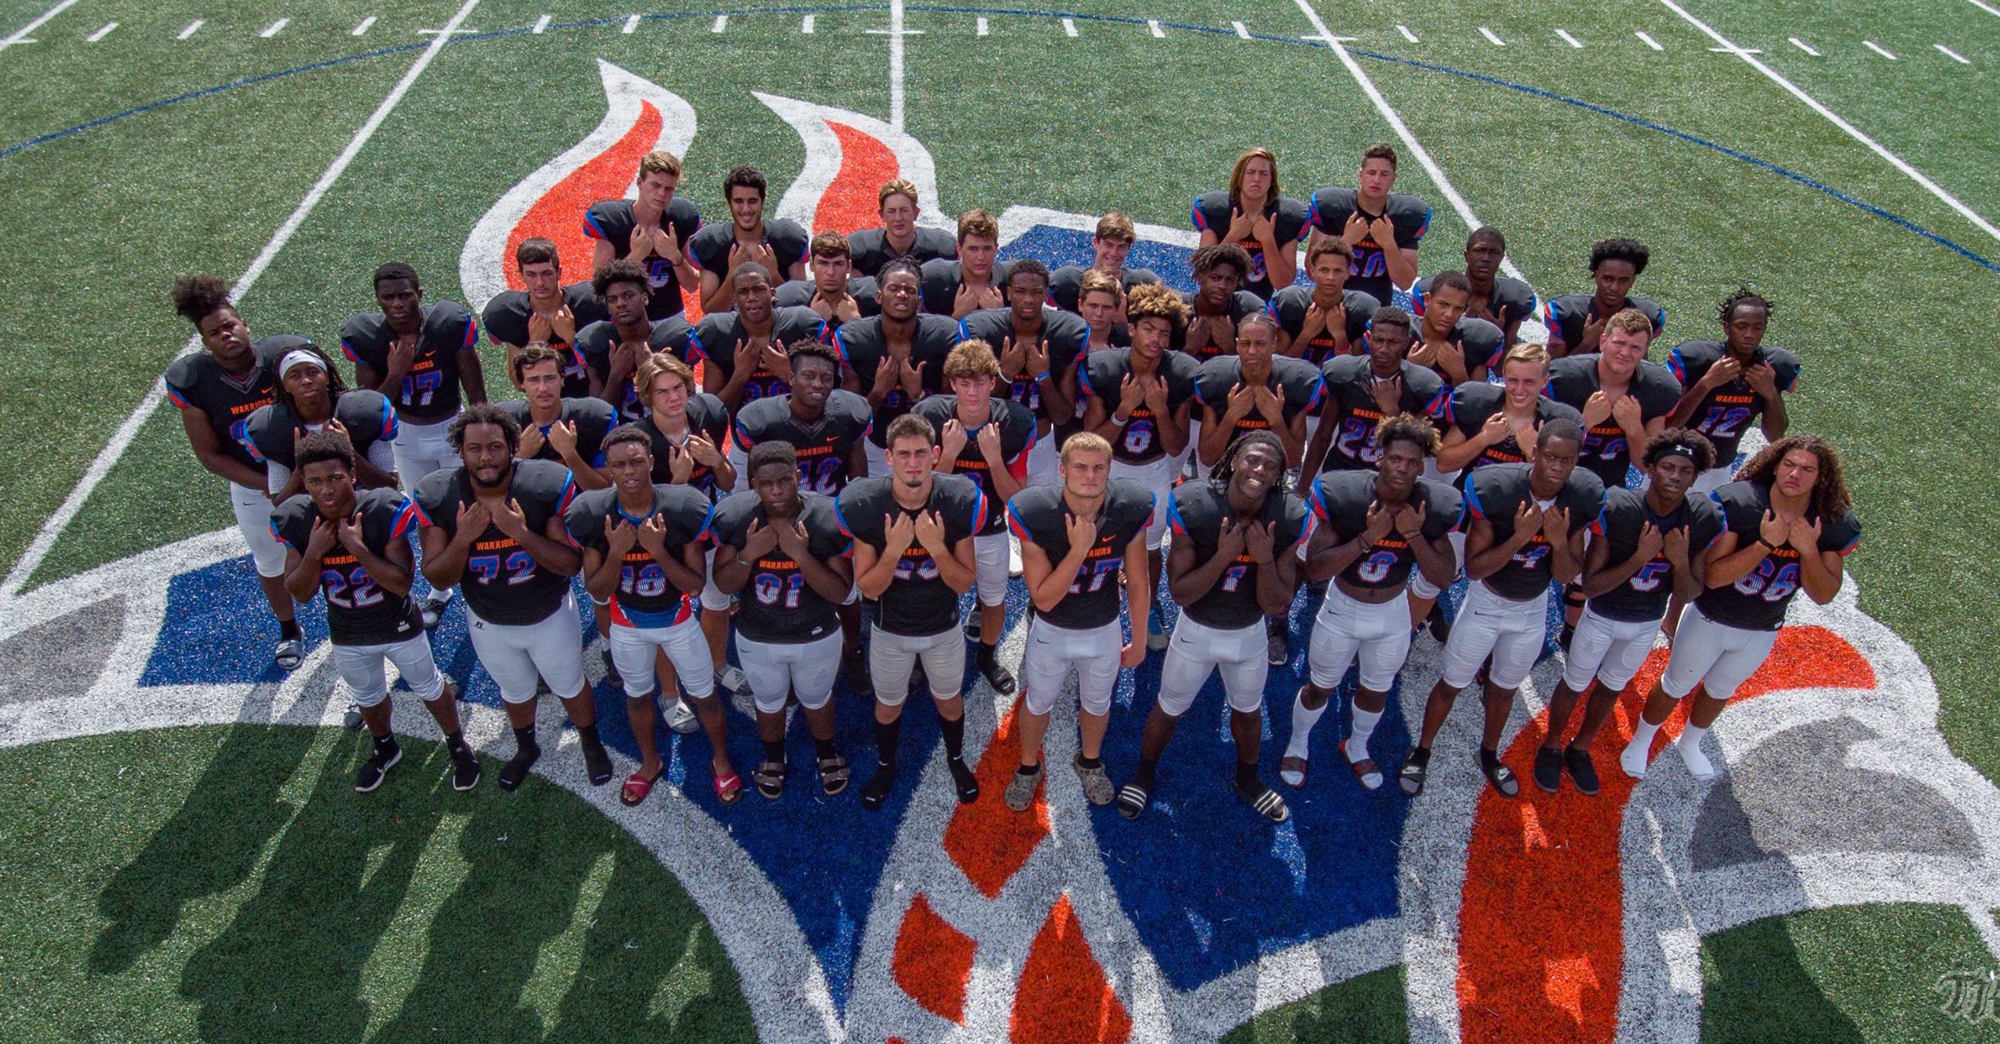 The 2018-19 West Orange Warrior football team finished with a 7-4 record. Photo courtesy of TK Photography